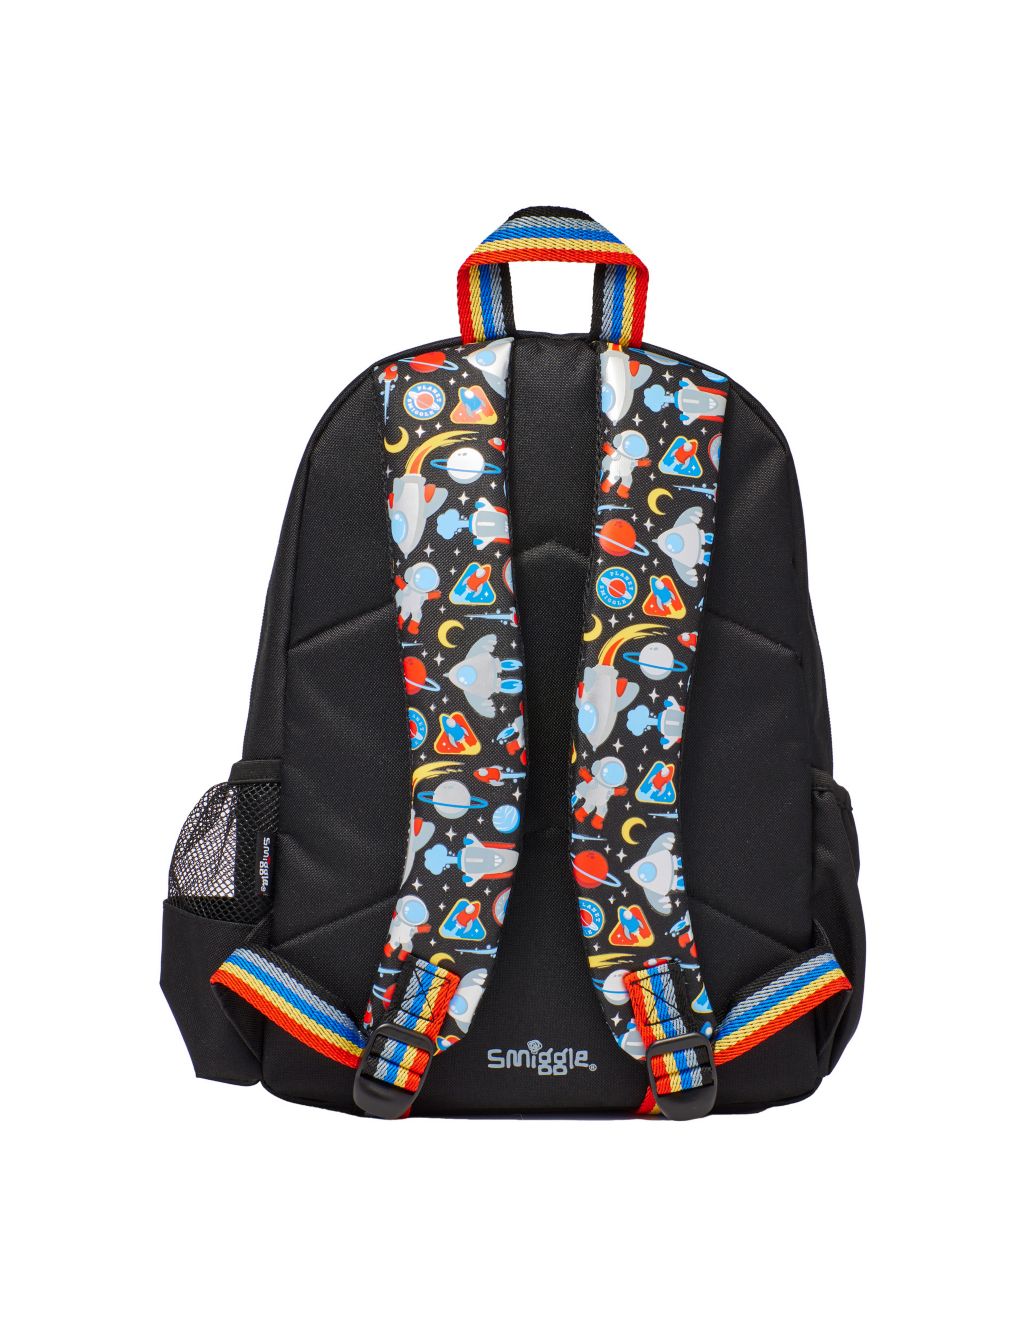 Kids' Space Backpack (3+ Yrs) image 2